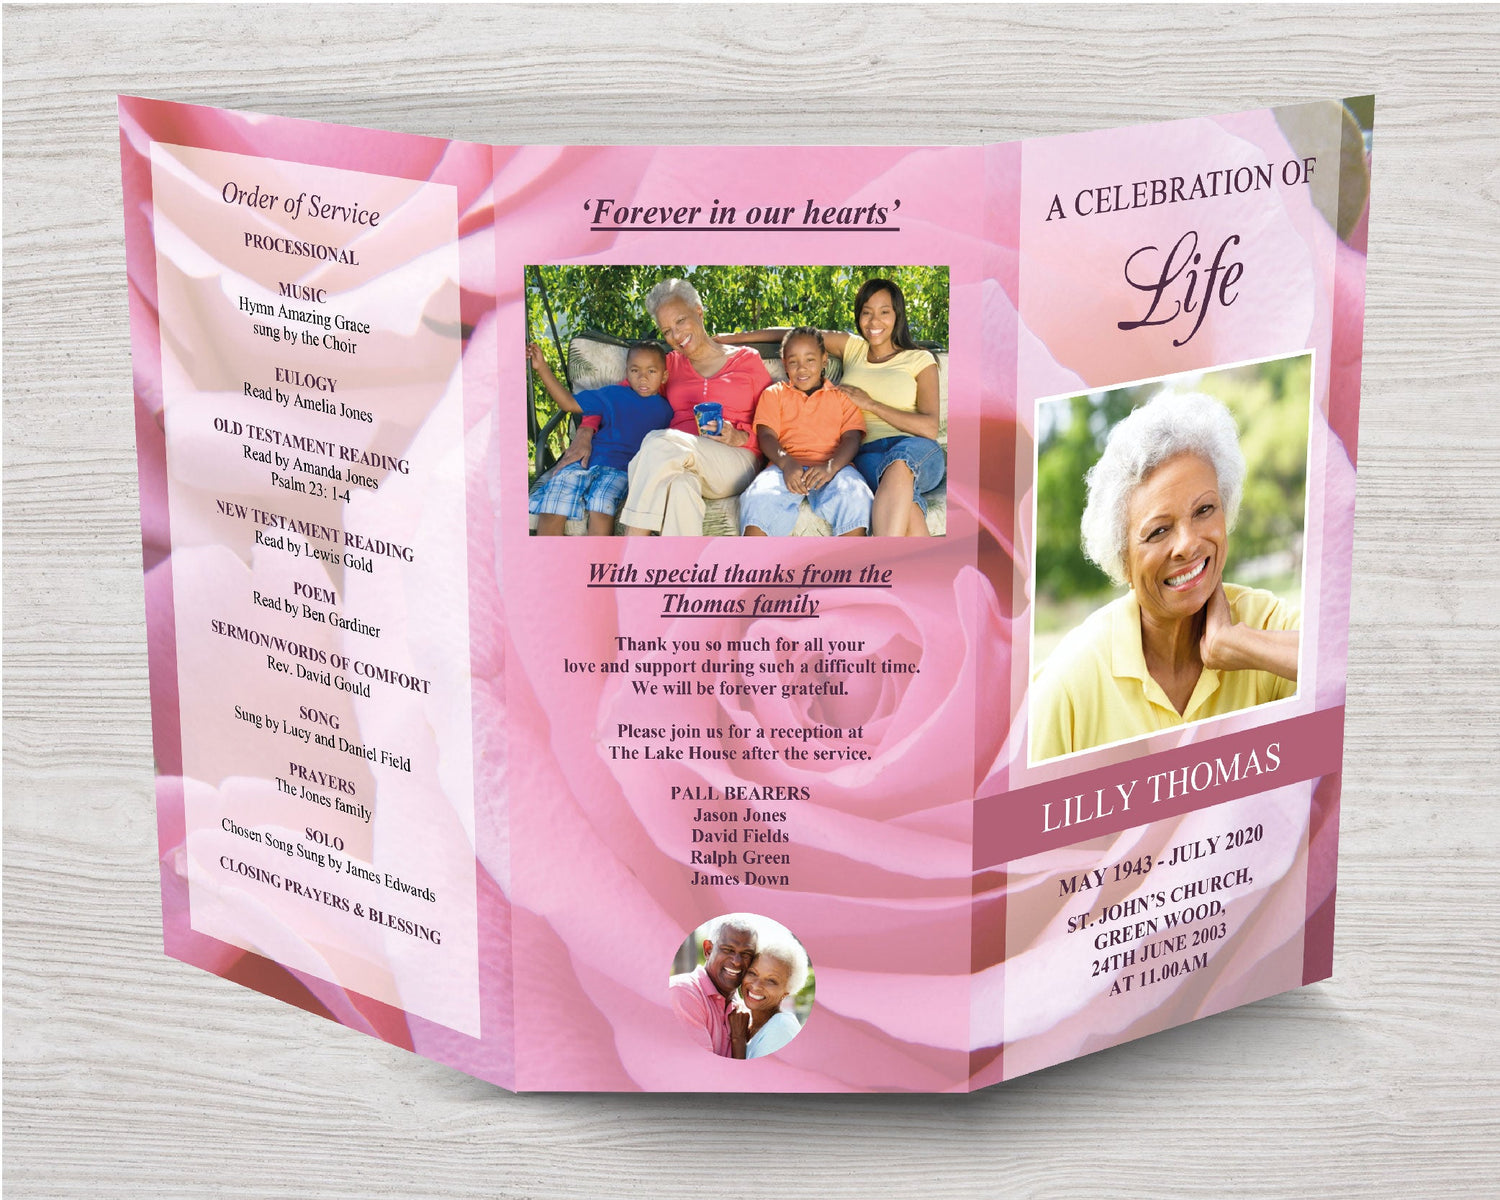 11x17 Trifold Pink Rose Funeral Program Template